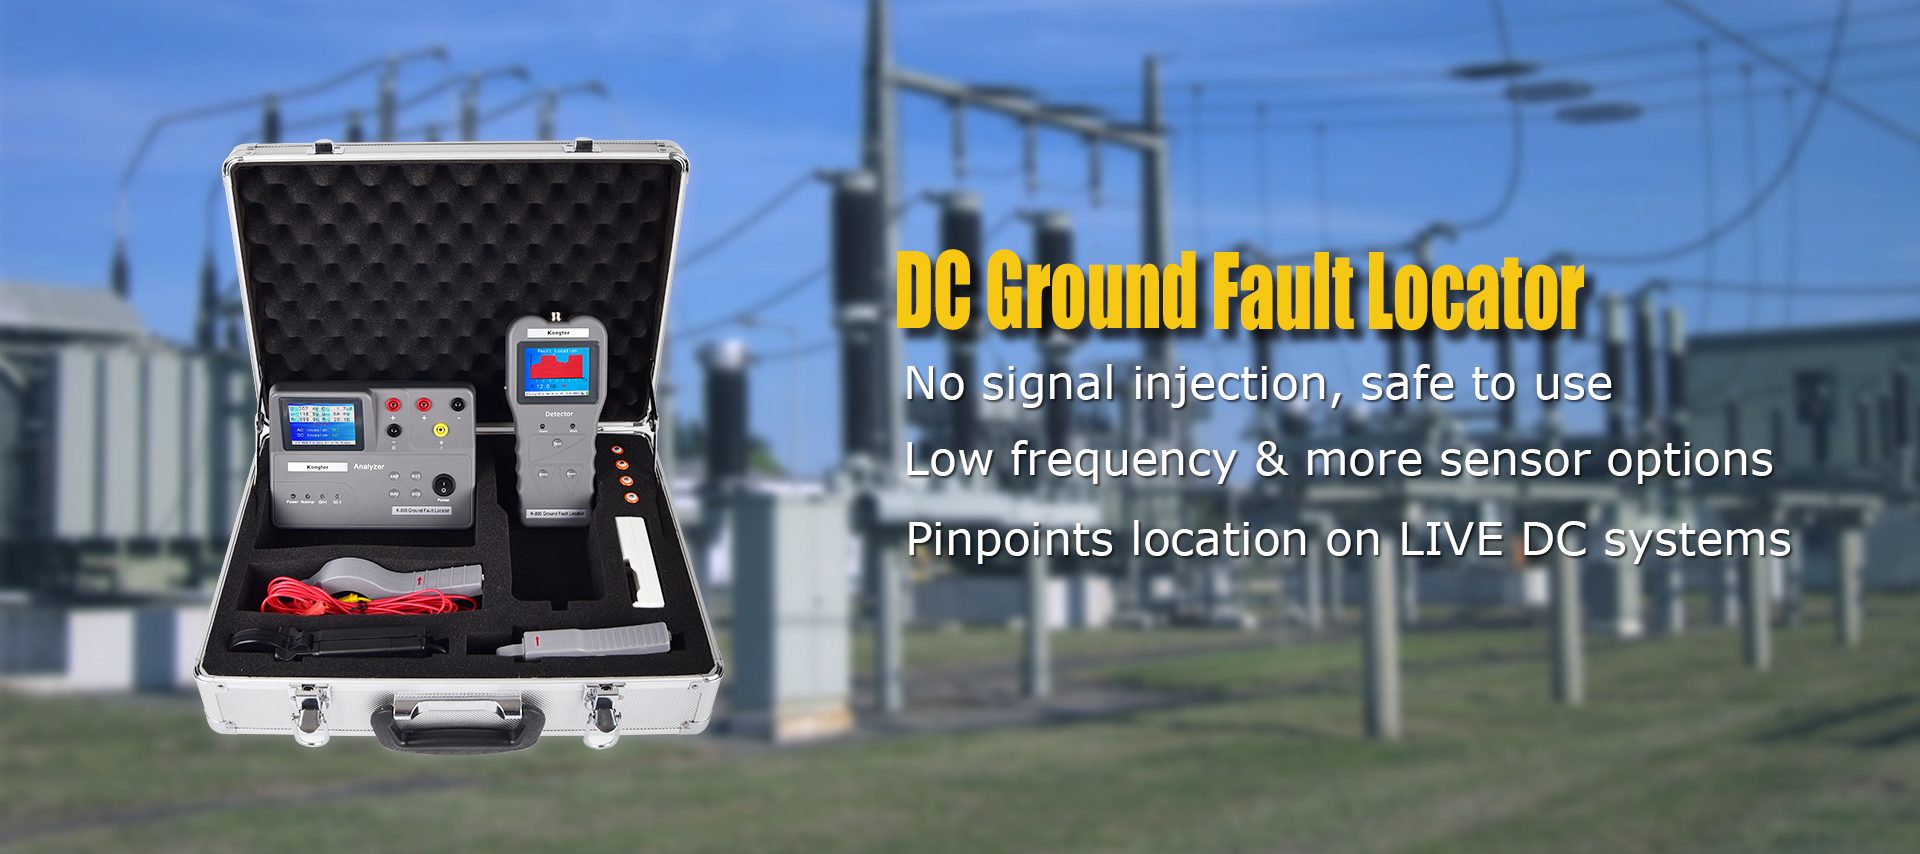 Kongter offers unique solutions of locators for fast and effective elimination of DC ground fault.